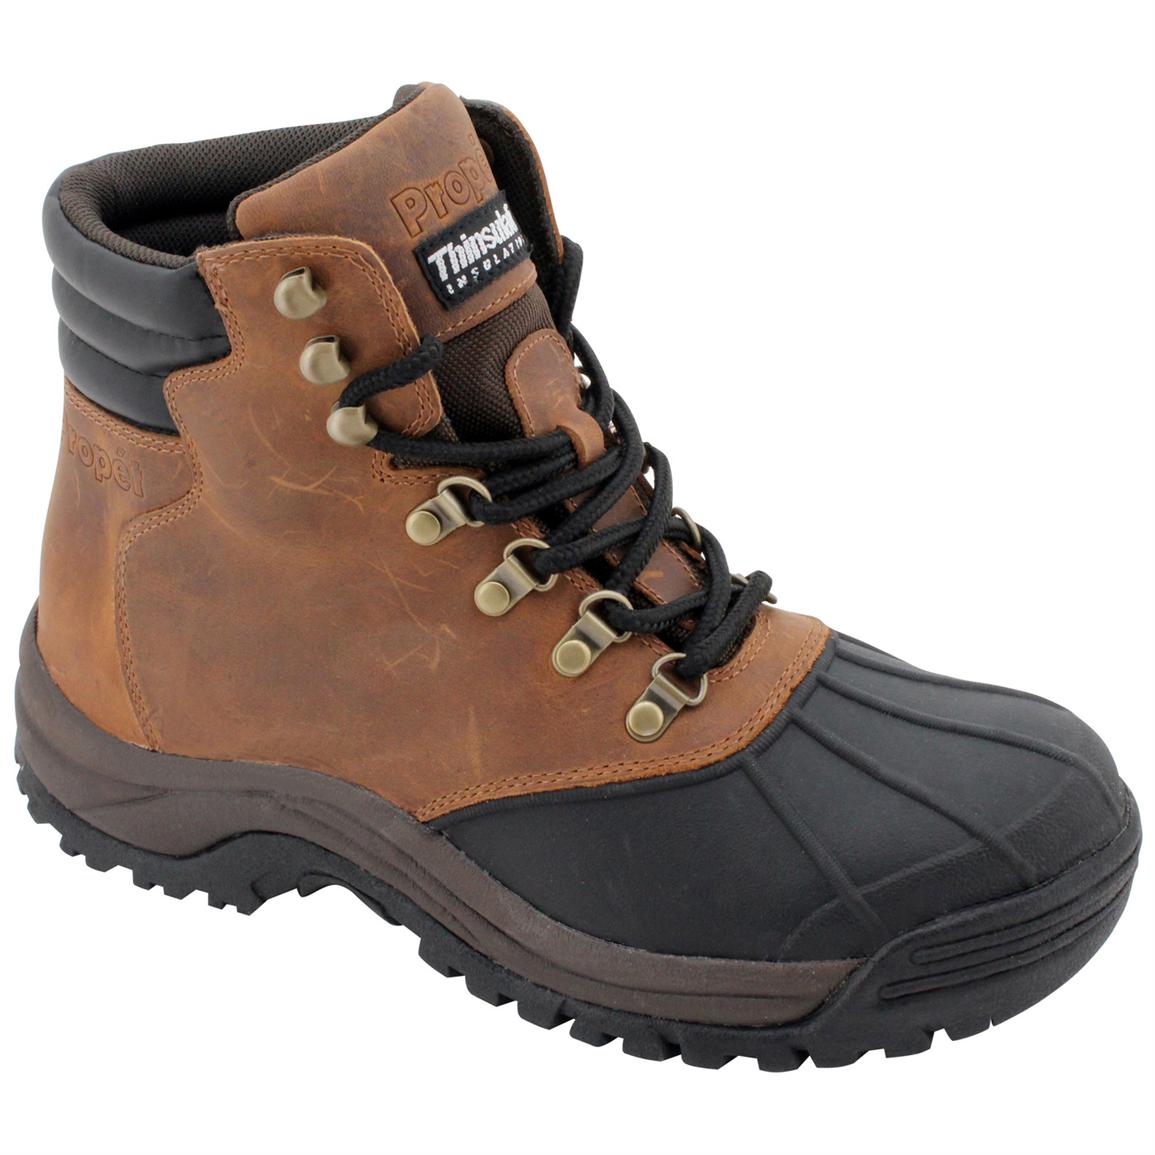 Men's Propet® Blizzard Waterproof Insulated Mid Boots 234503, Winter & Snow Boots at Sportsman